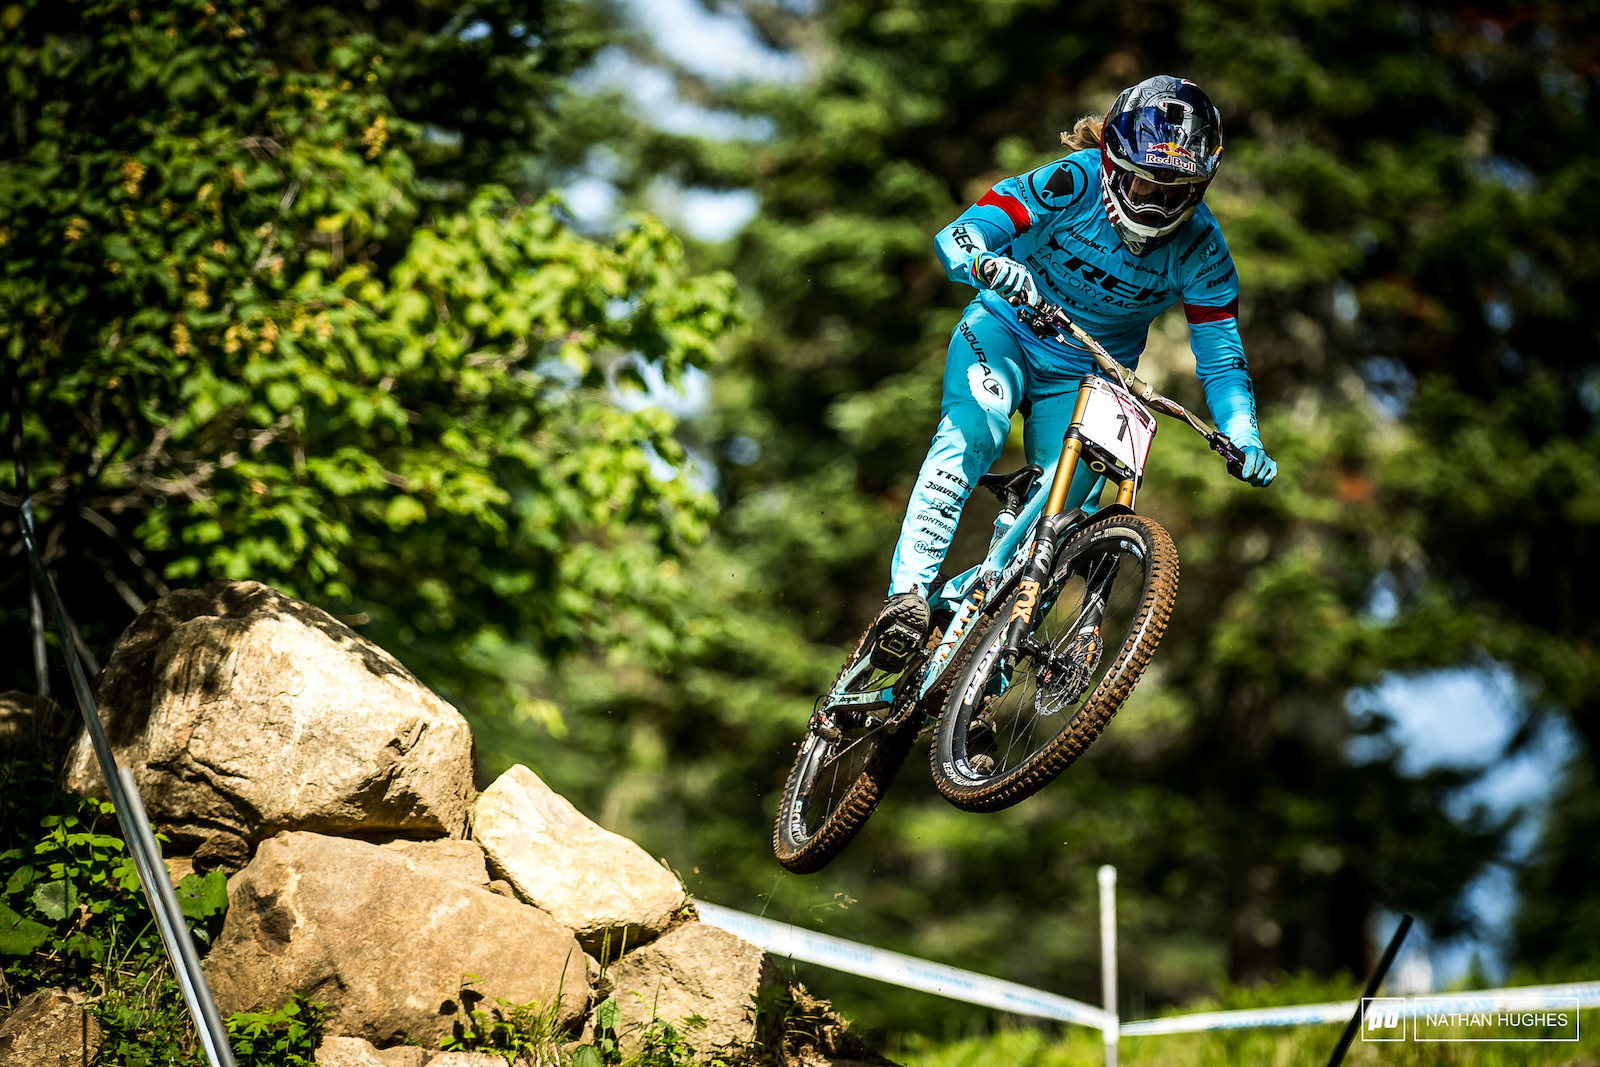 Rachel Atherton rose to Seagrave s qualie challenge taking the win by a convincing 5 seconds.